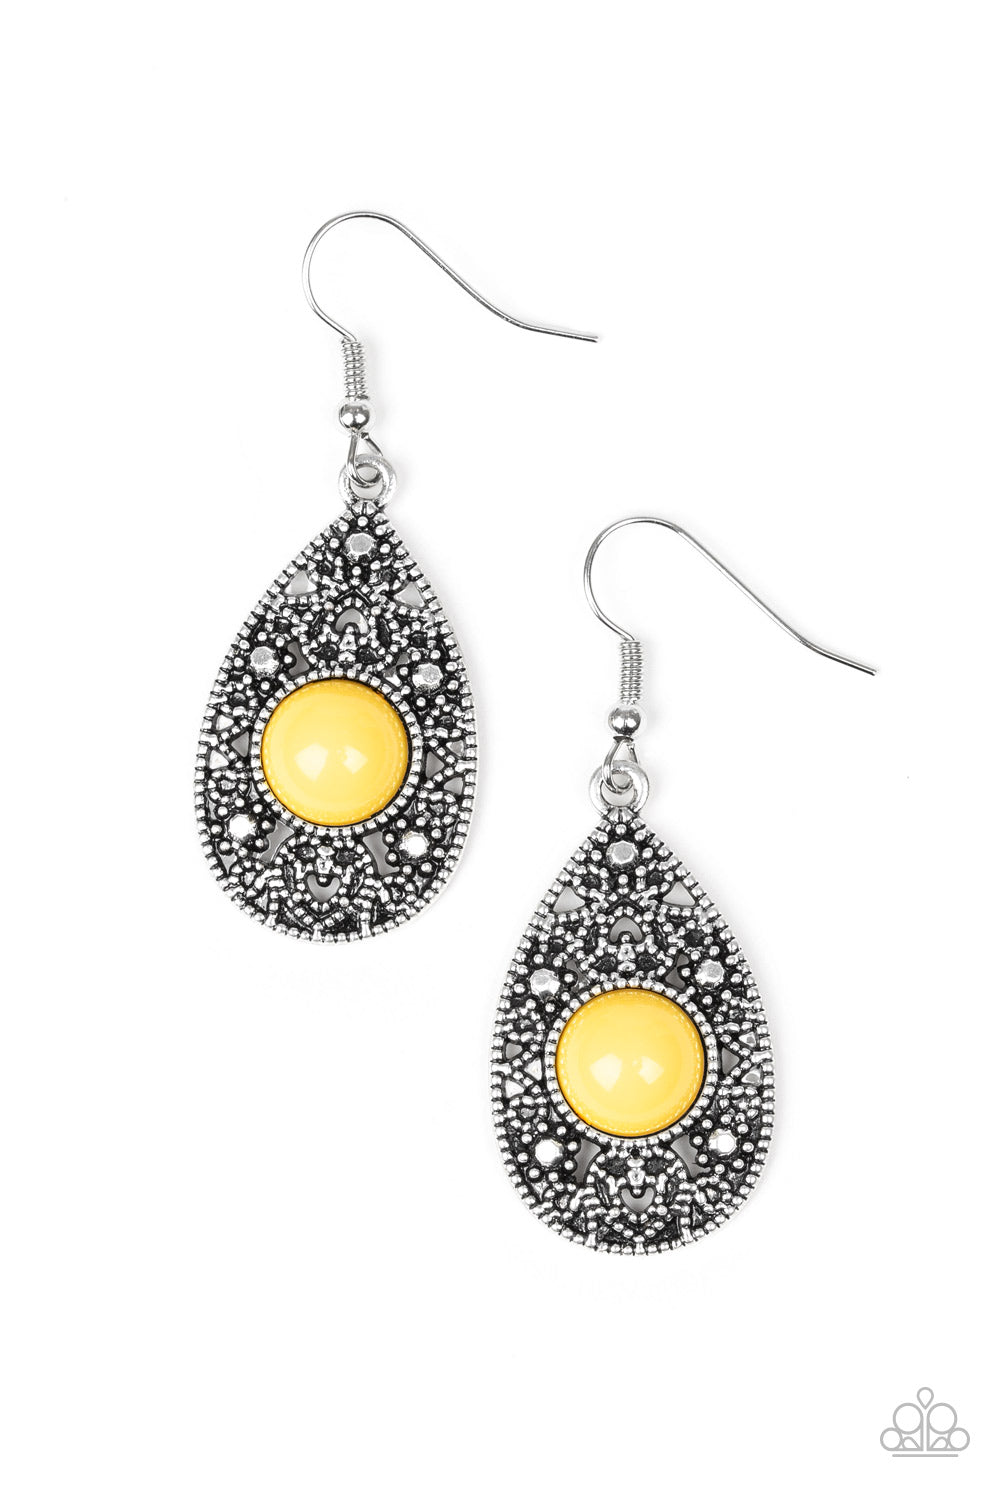 From POP To Bottom - Yellow and Silver Earrings - Paparazzi Accessories - A shiny yellow bead is pressed into the center of a silver studded teardrop frame for a perfect pop of color. Earring attaches to a standard fishhook fitting. Sold as one pair of earrings.